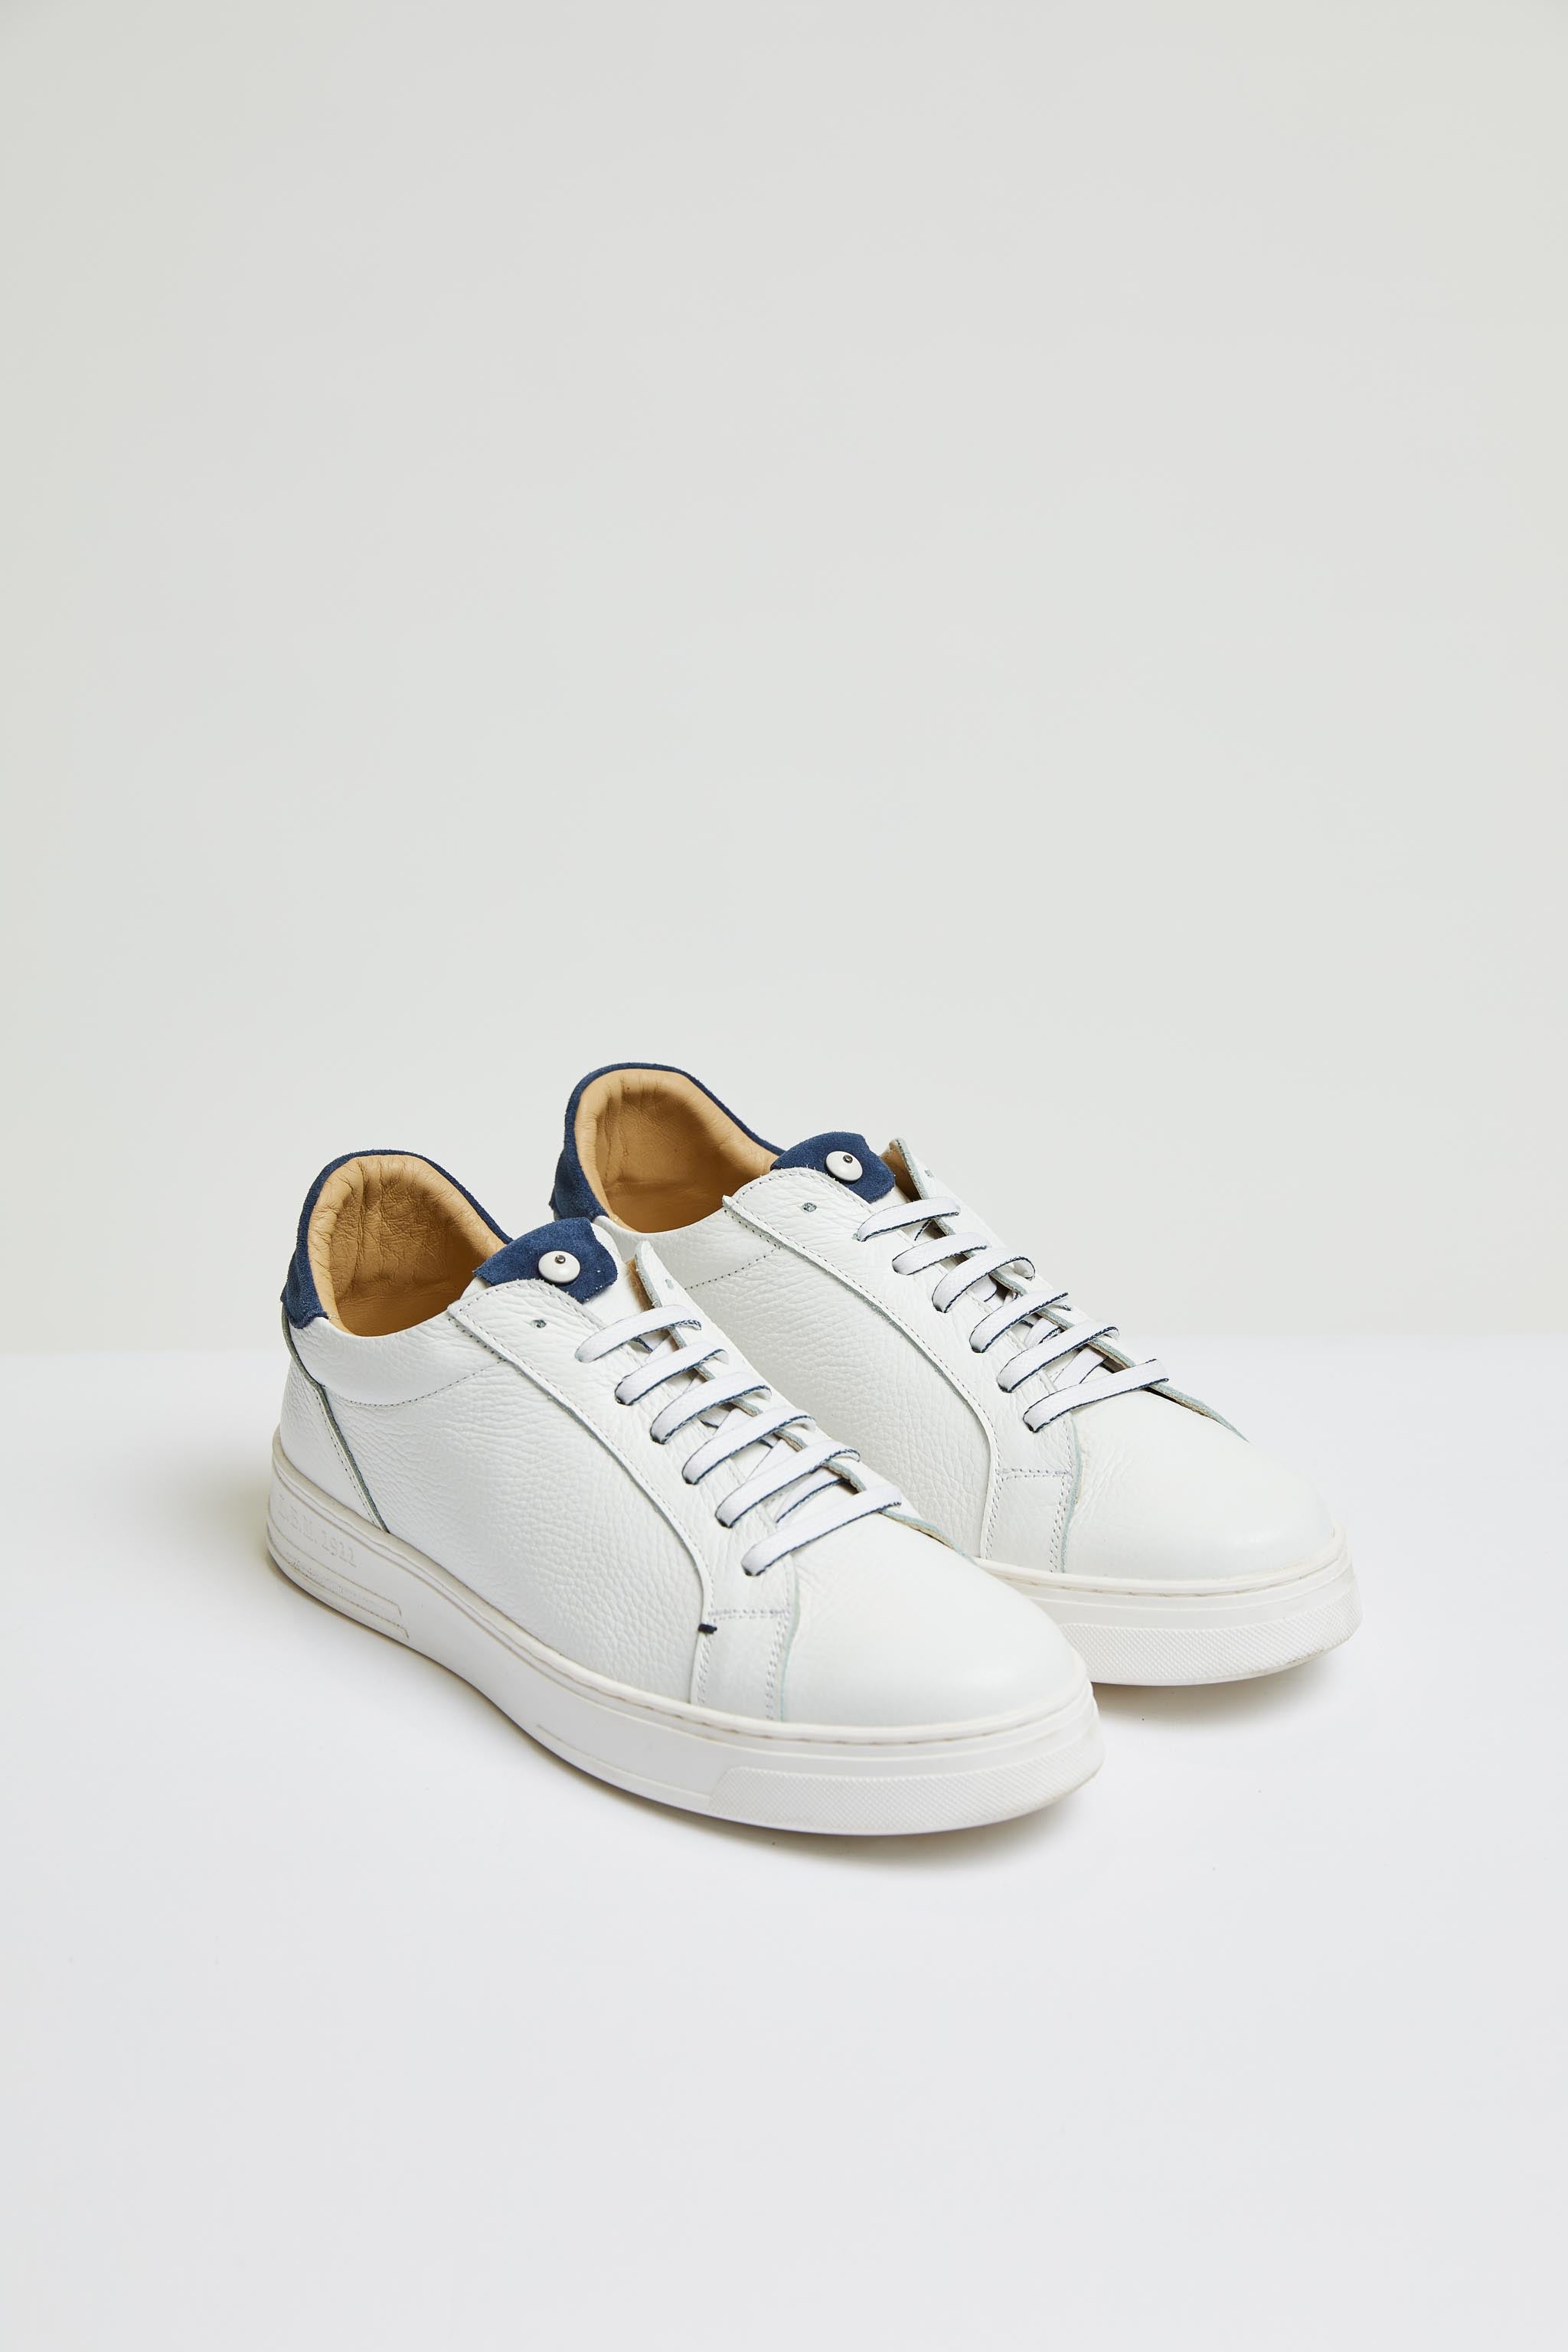 Retro-styled tennis shoe in blue